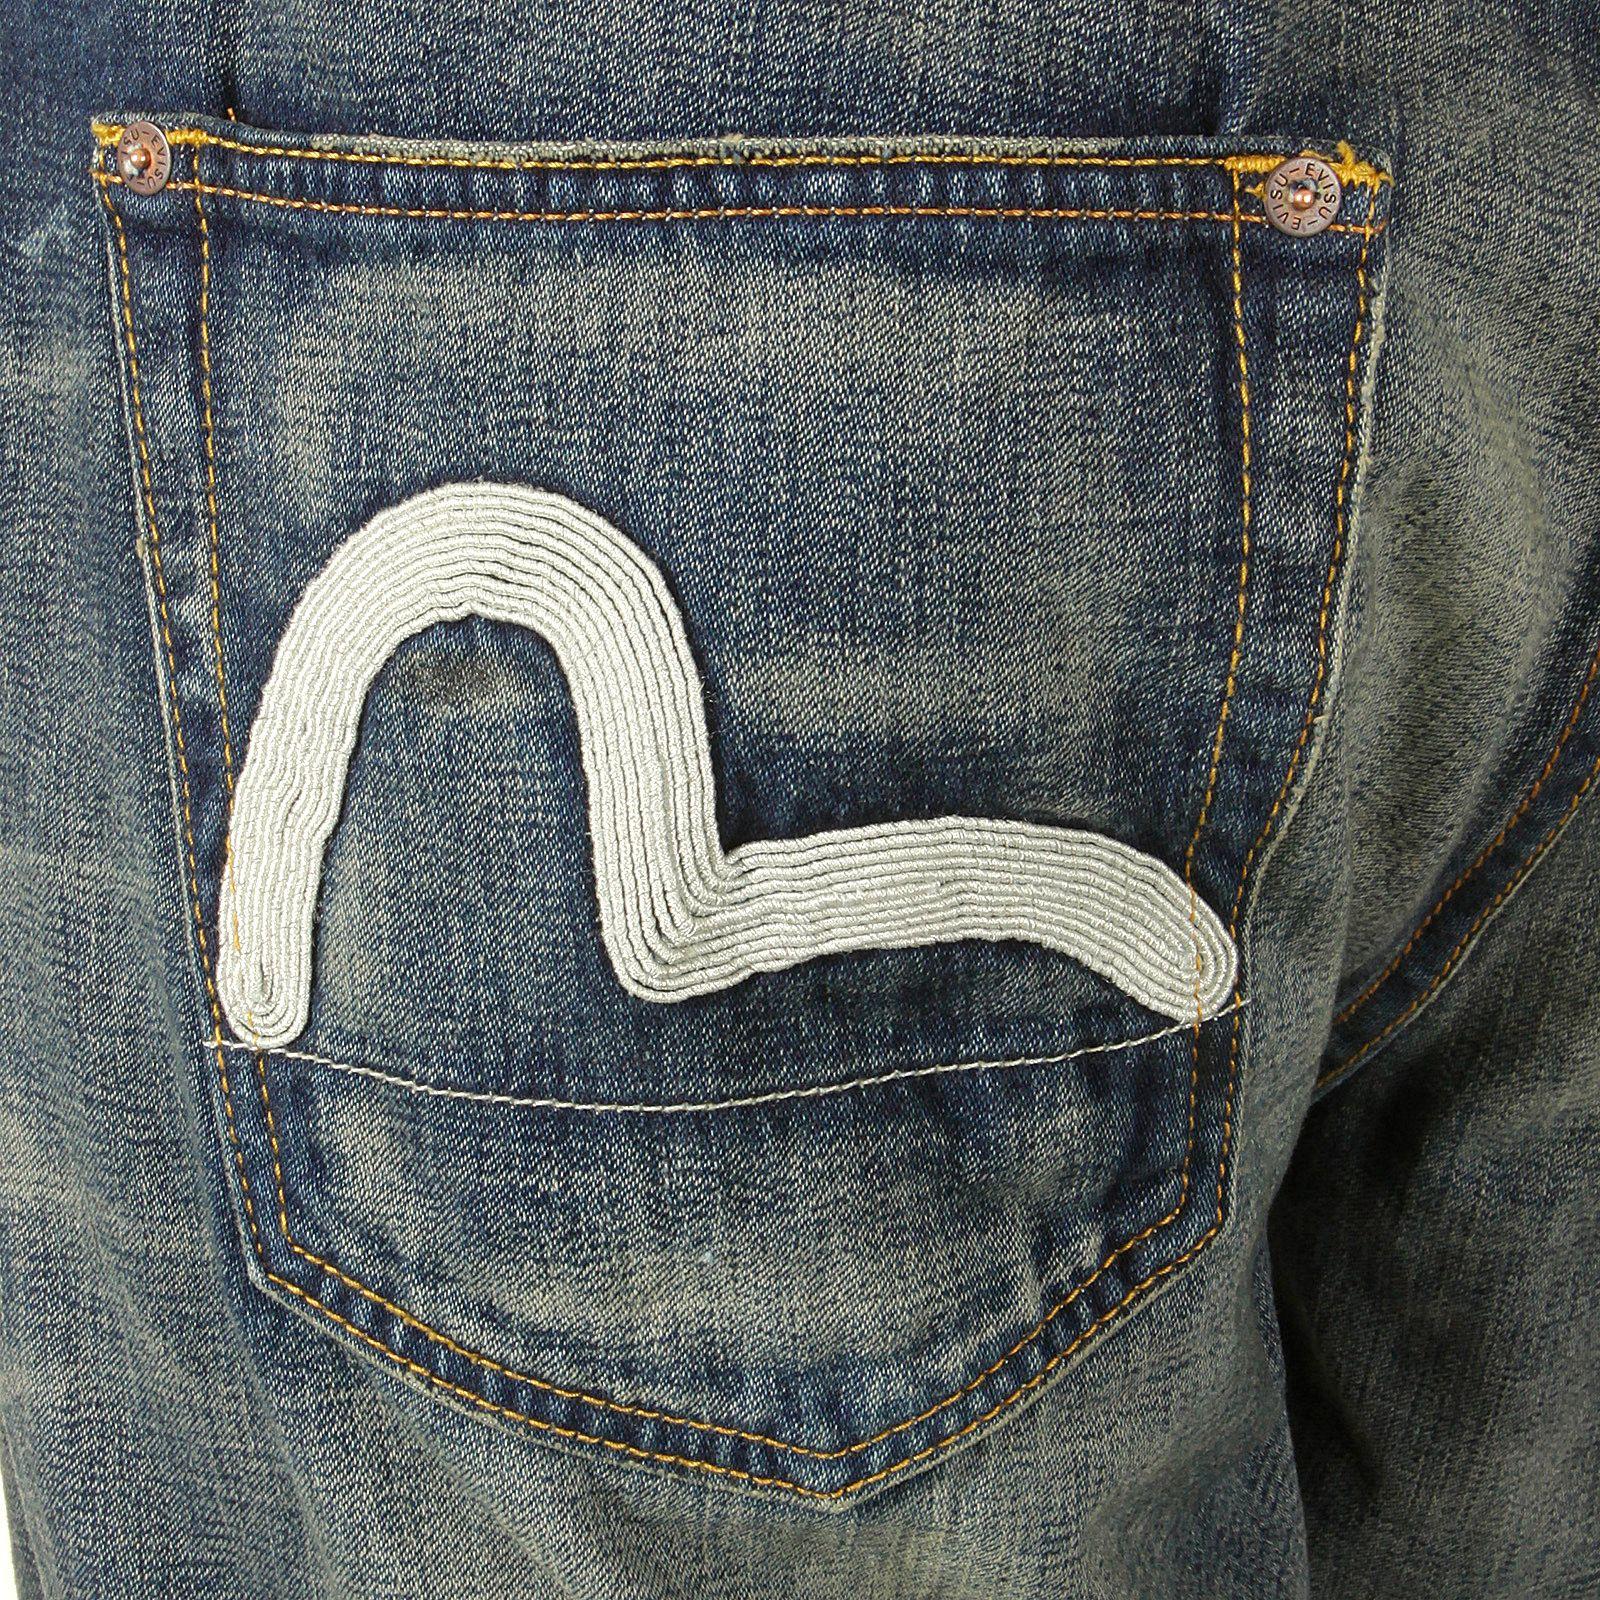 Denim and White Logo - Evisu Denim Jeans Featuring Whiskered and Faded Details